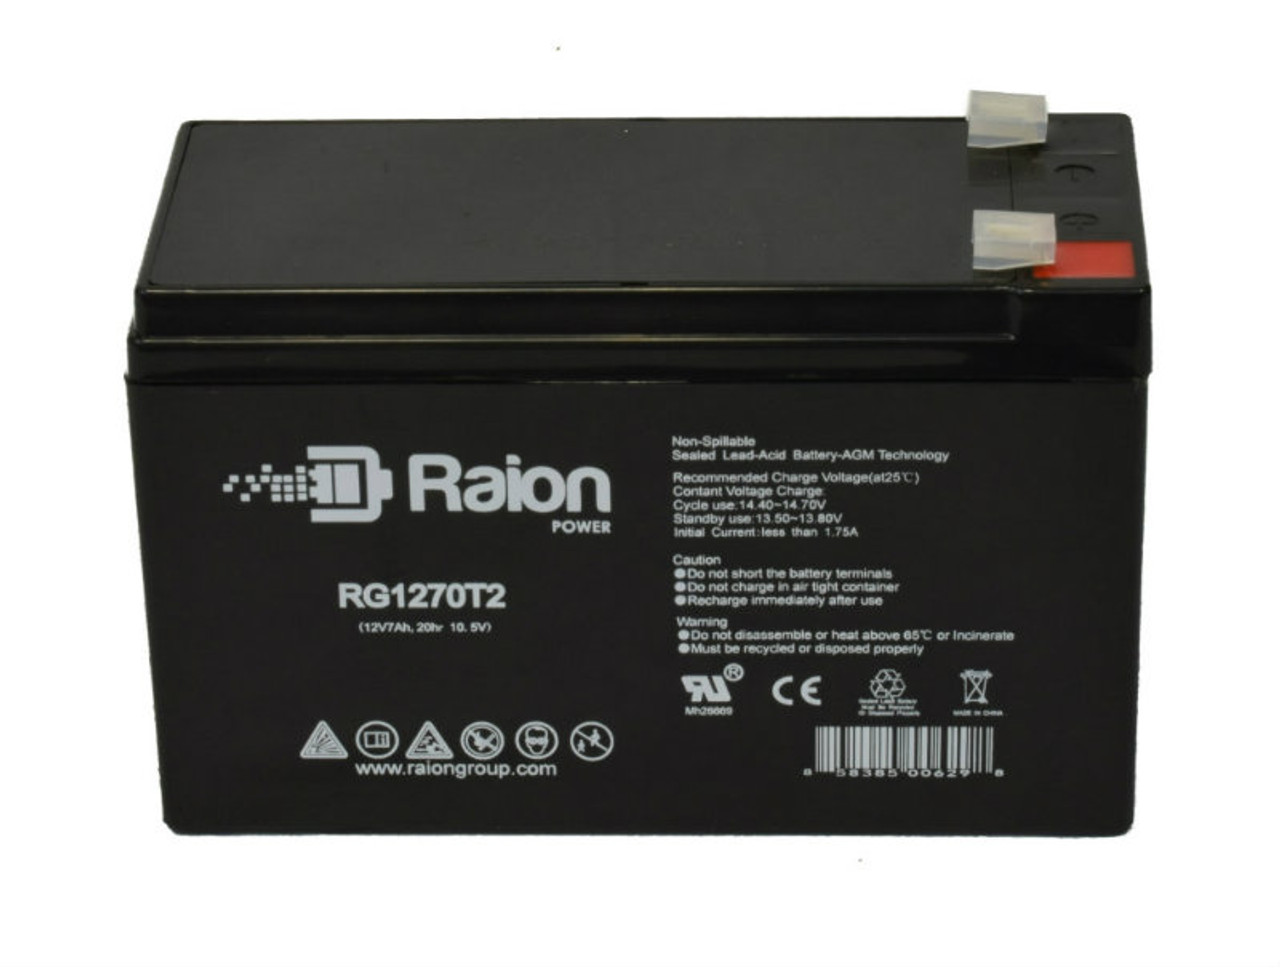 Raion Power RG1270T2 12V 7Ah Lead Acid Battery for Costzon 12V Kids Ride On Tractor with Trailer